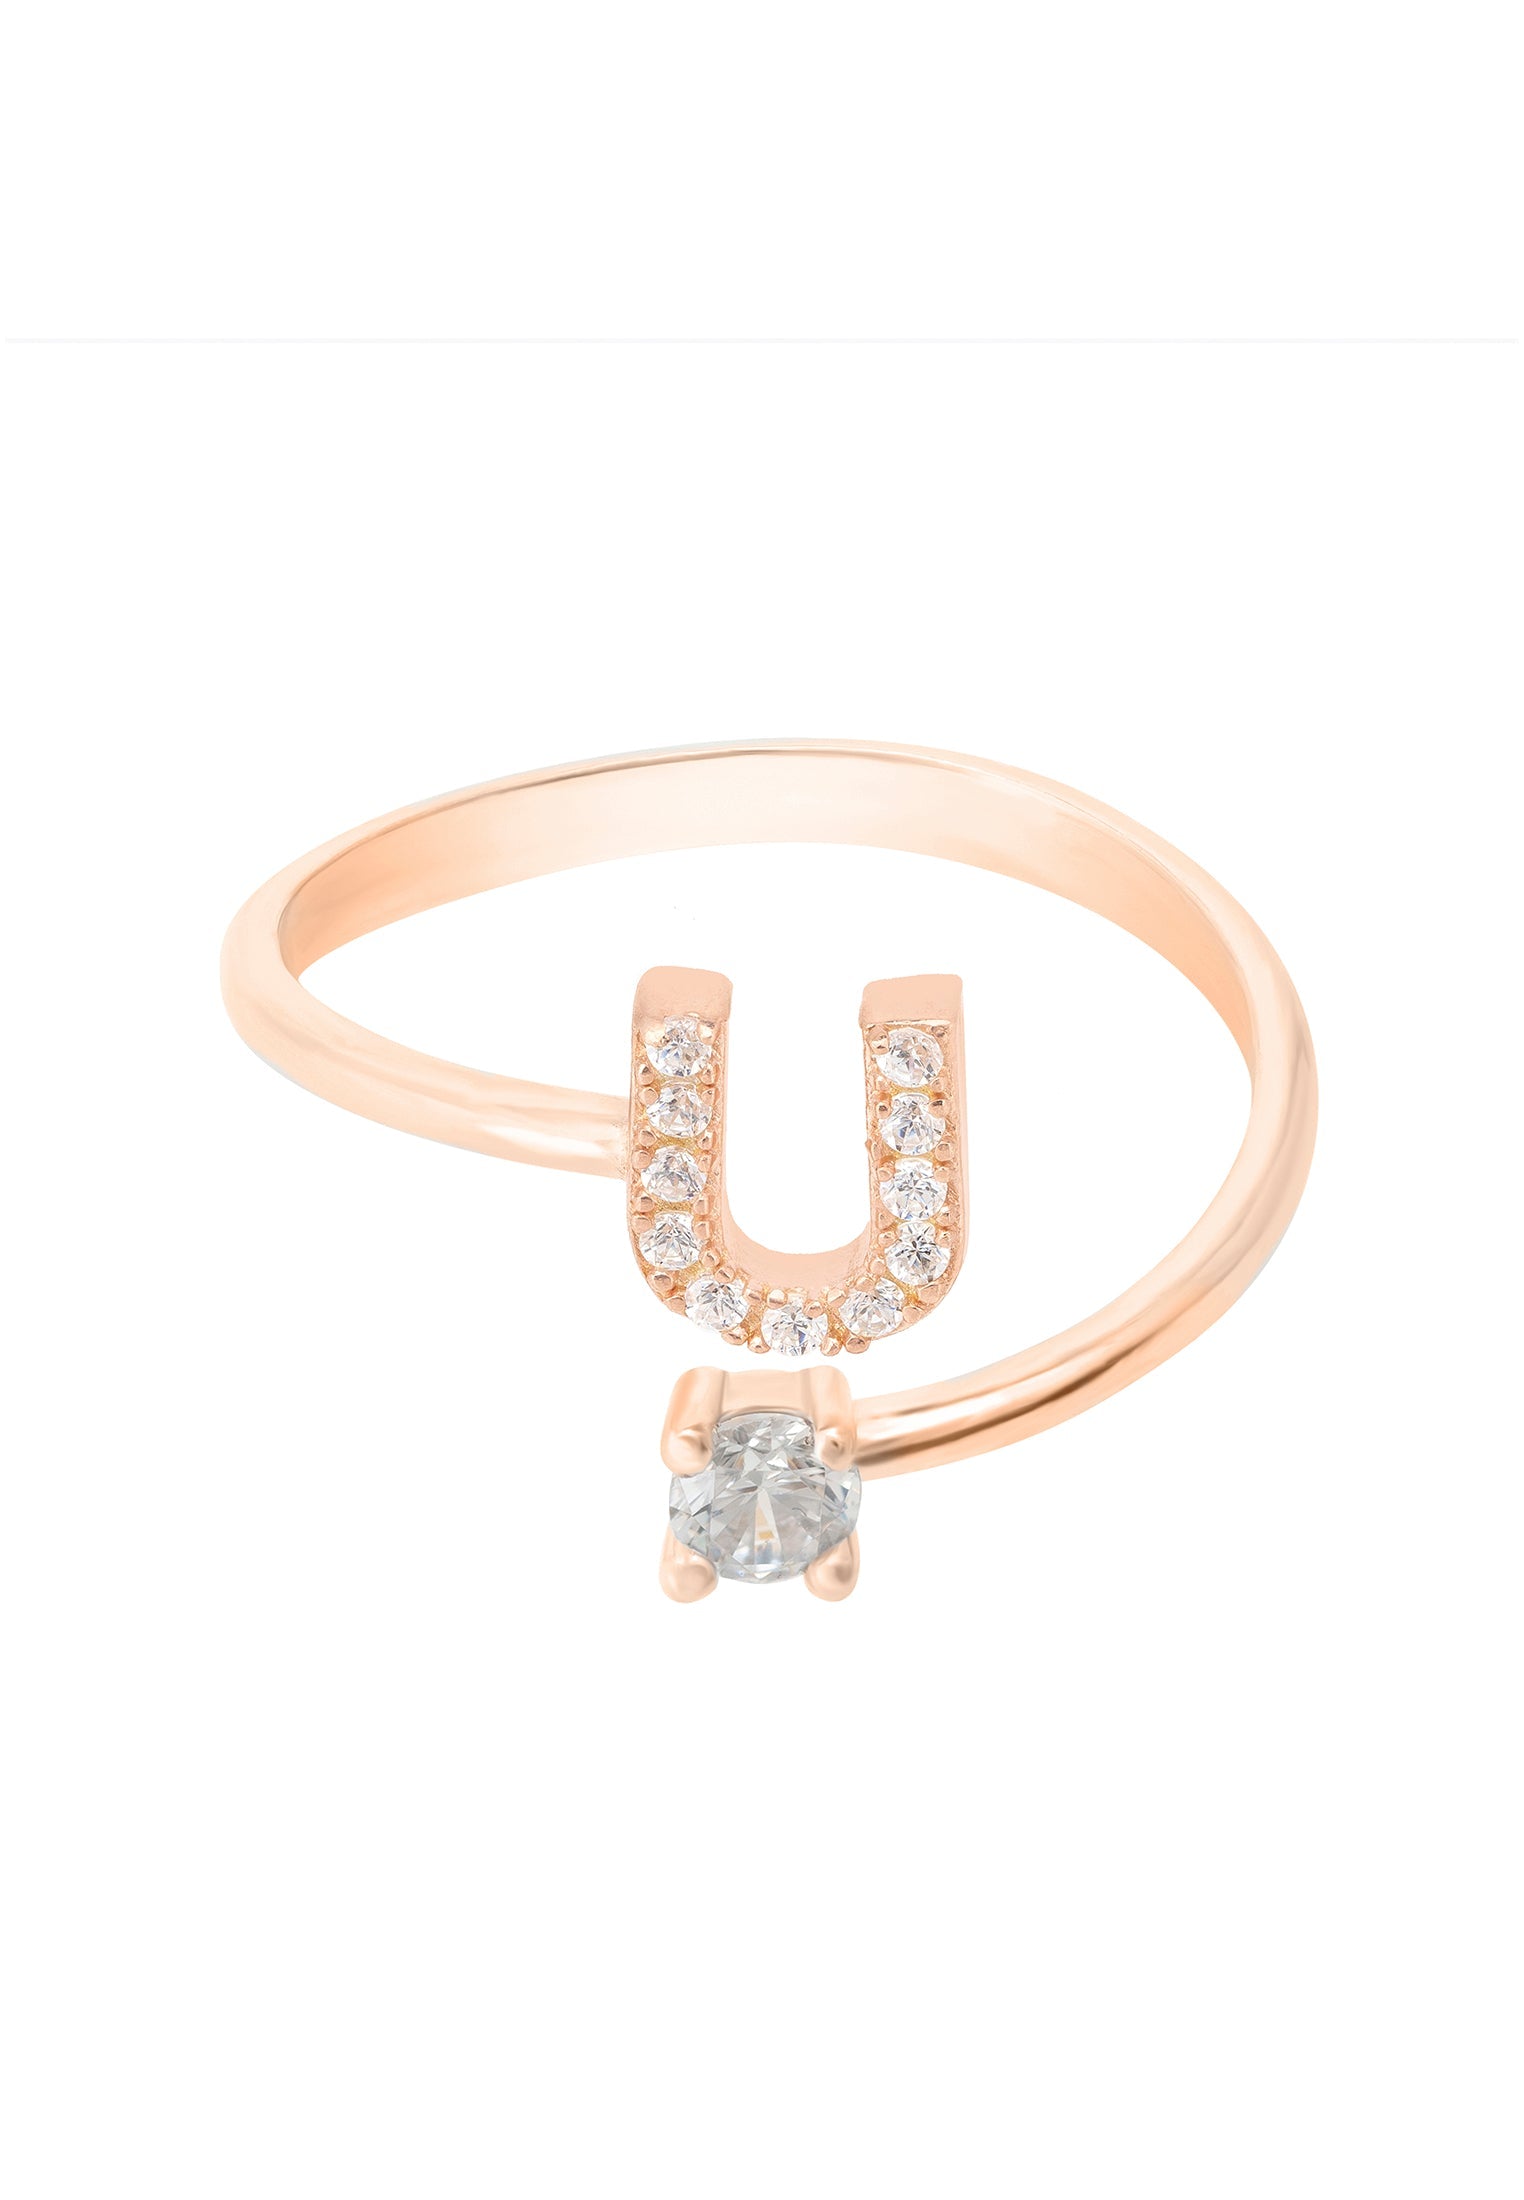 Rose Gold Initial Letter Ring with Cubic Zirconia - Personalized Birthday Gift Idea - Jewelry & Watches - Bijou Her -  -  - 